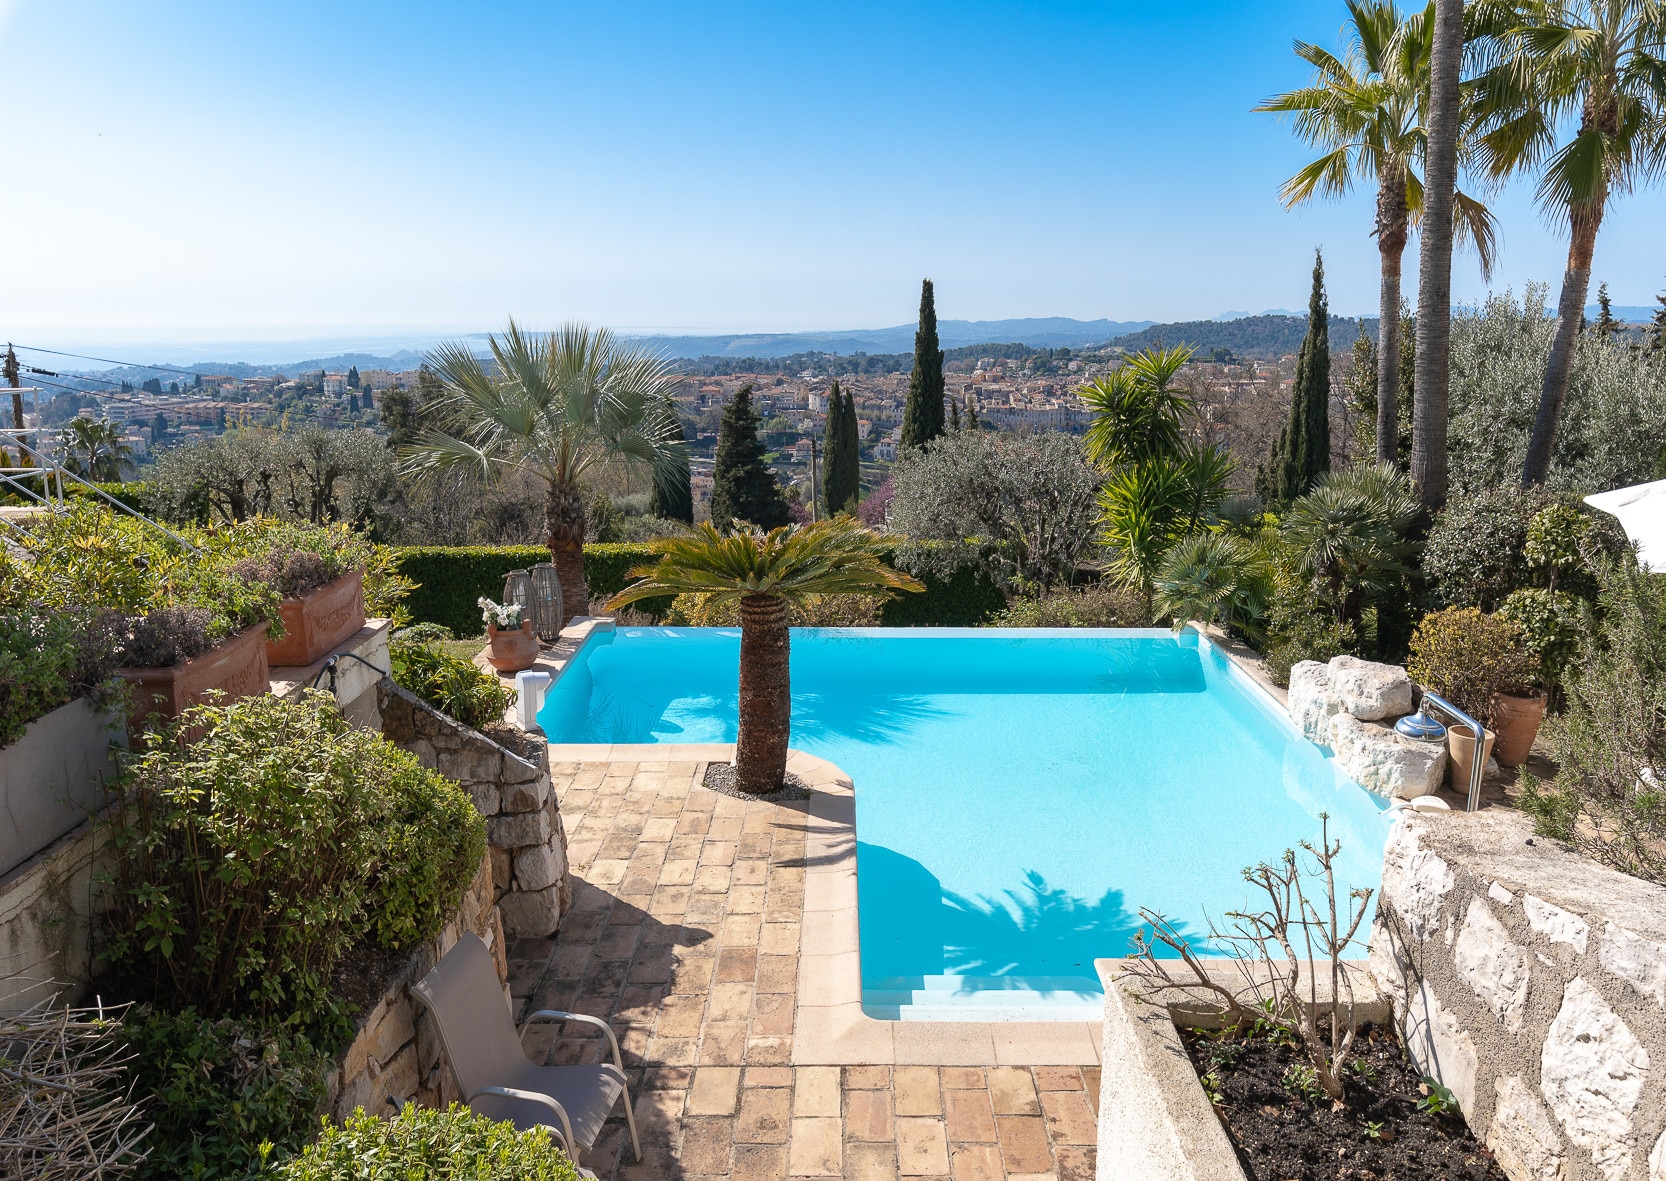 Property Image 2 - Beautiful property located just outside the village of Vence with spectacular views